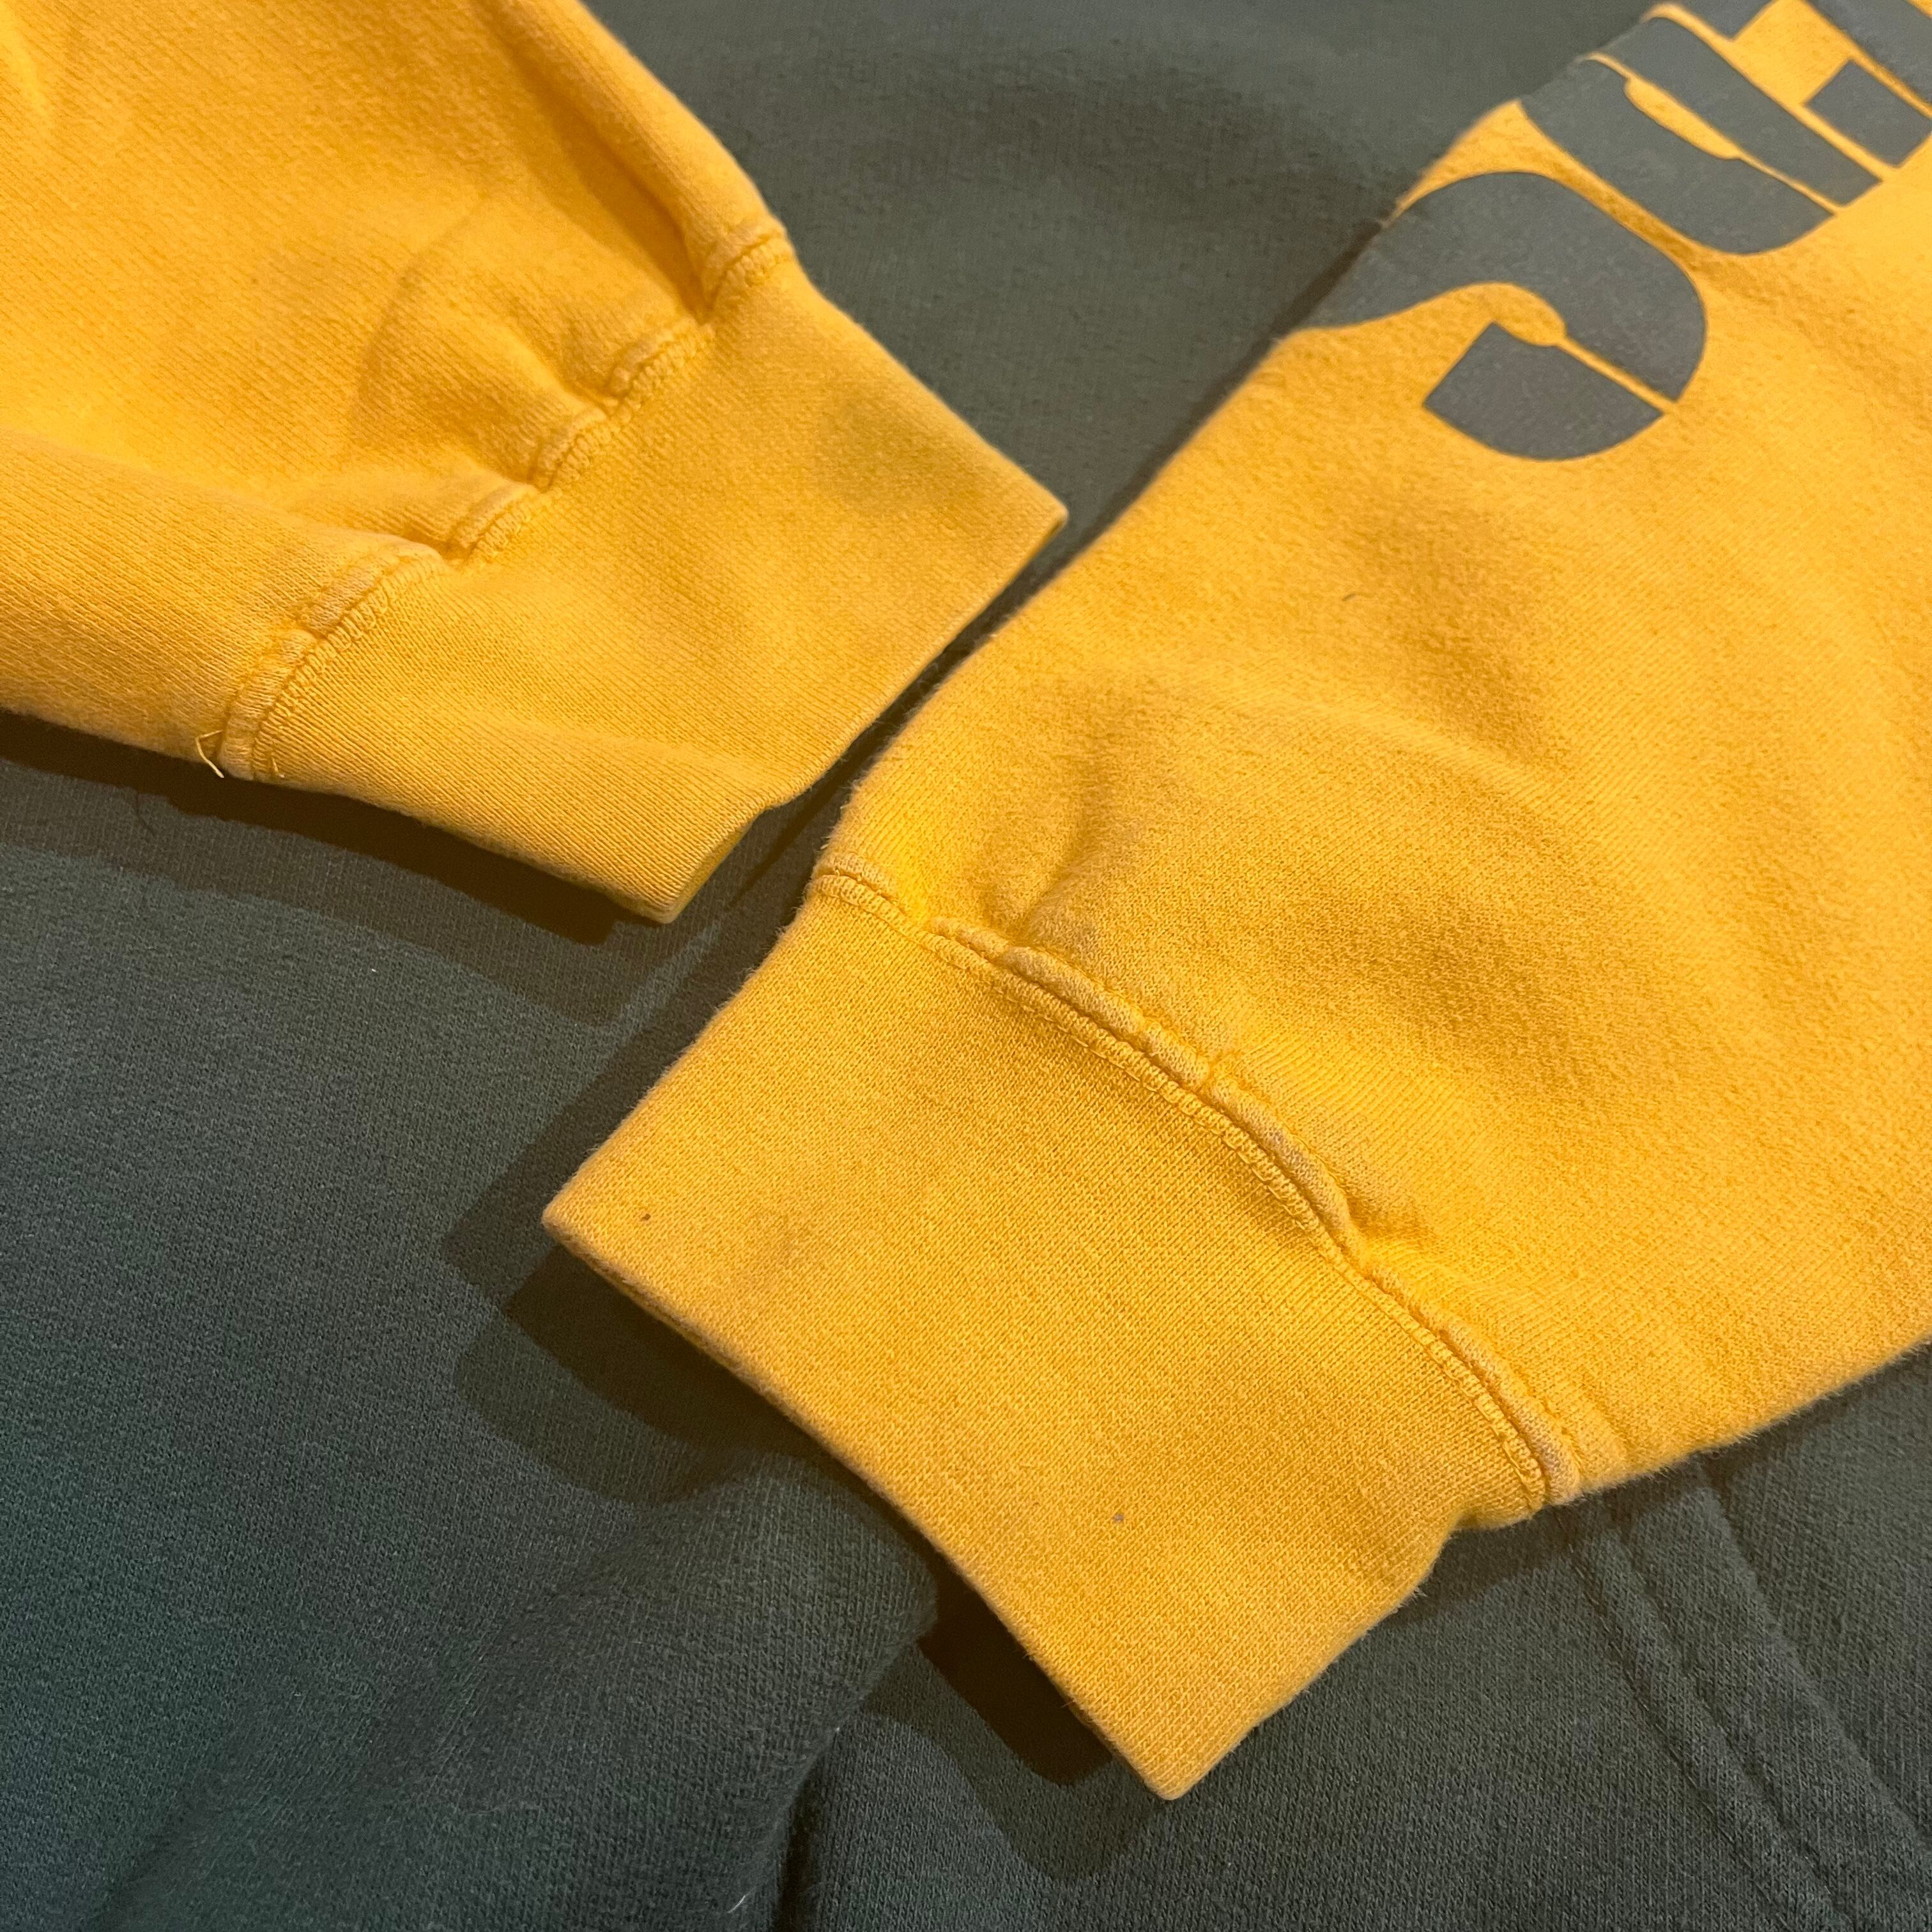 size: L 【 NFL 】PACKERS パッカーズ パーカー 緑 黄色 ロゴパーカー